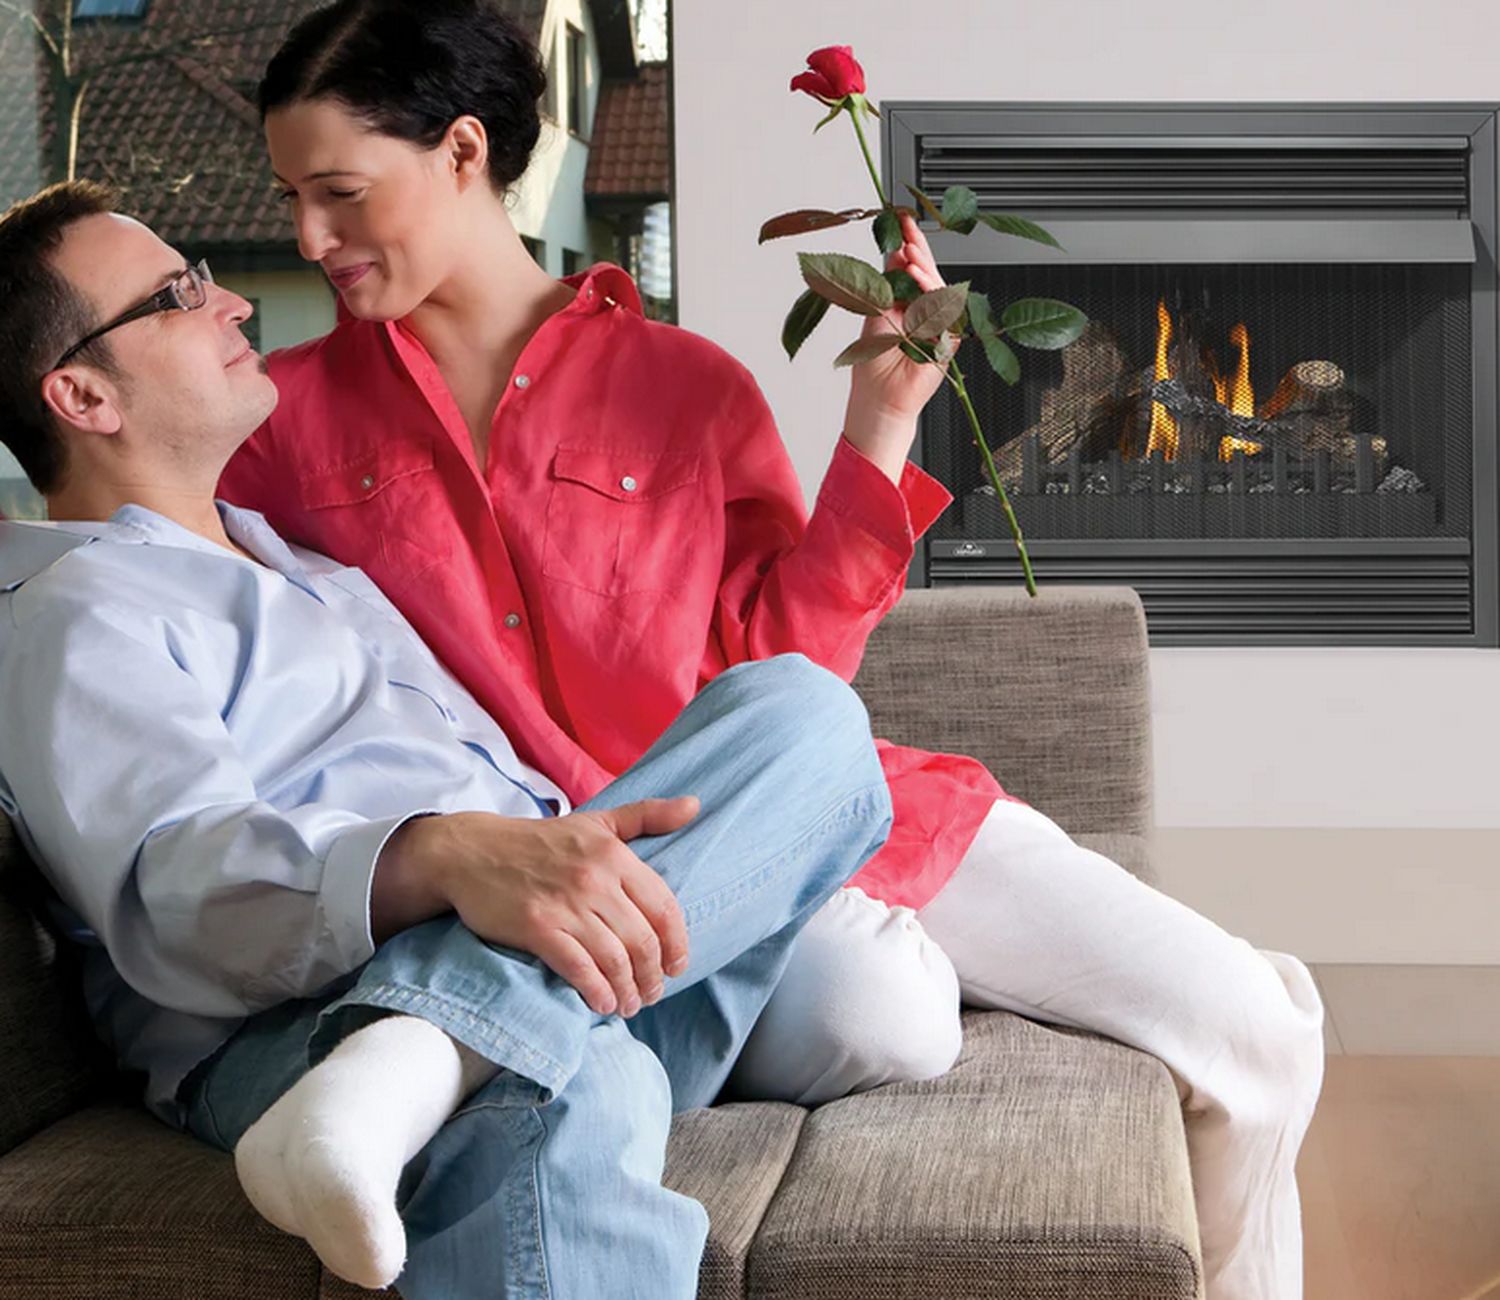 Grandville fireplace with close up couple